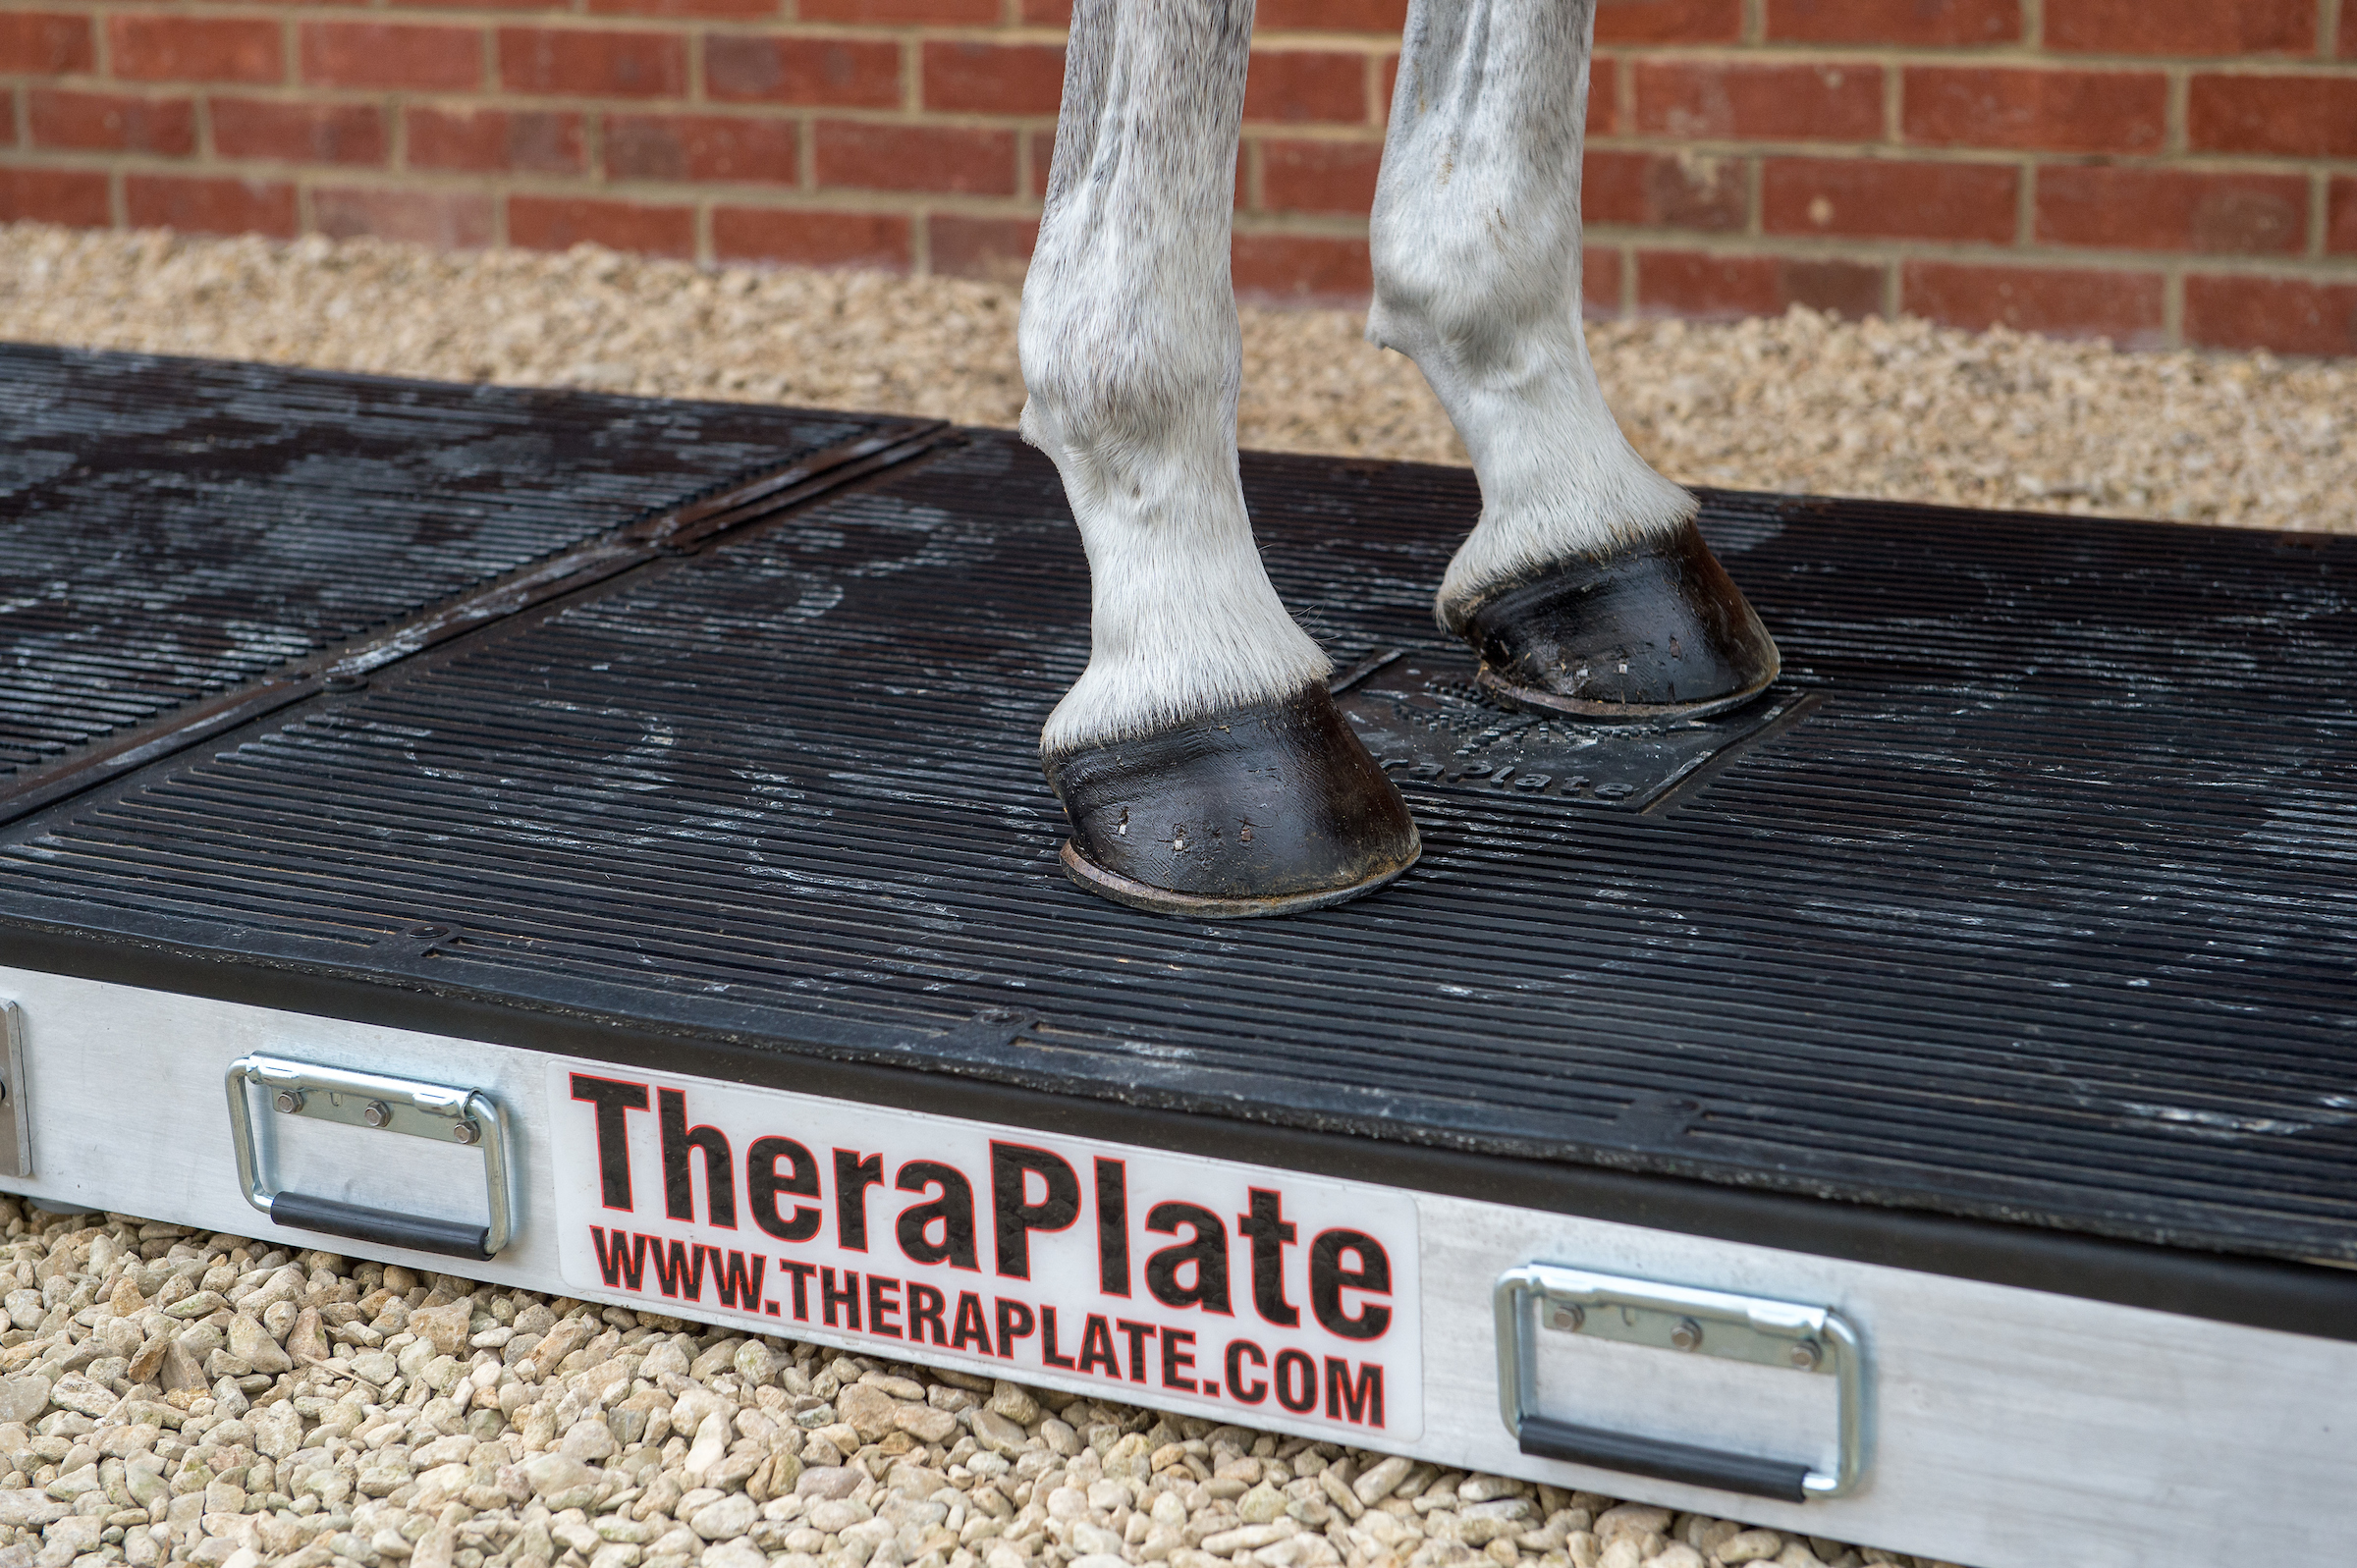 TheraPlate UK to offer new rental option